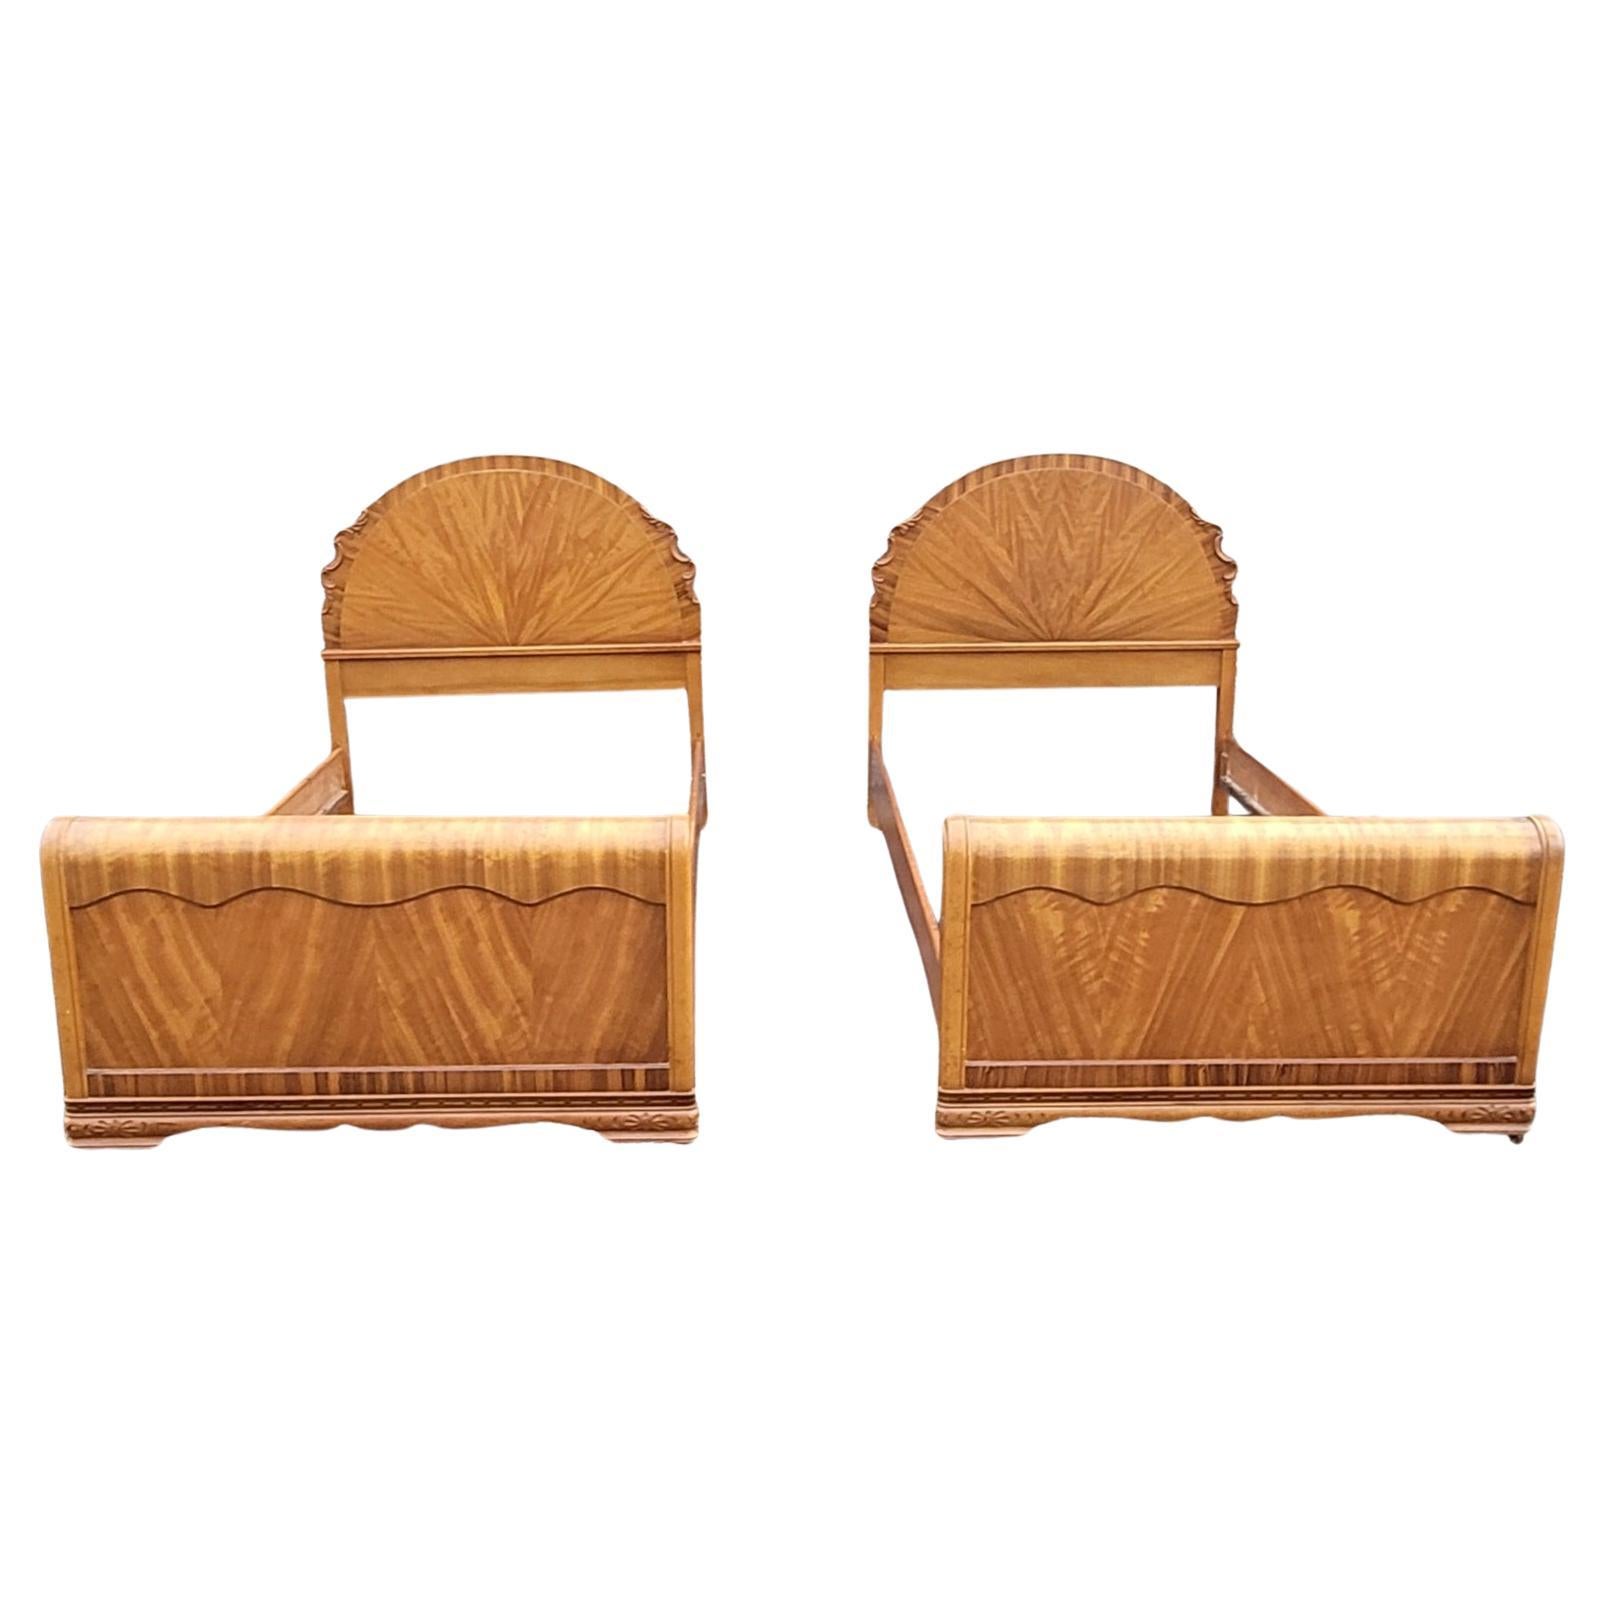 A Pair of 1930s Art Deco Mahogany Twin Size Bedsteads (amerikanisch) im Angebot